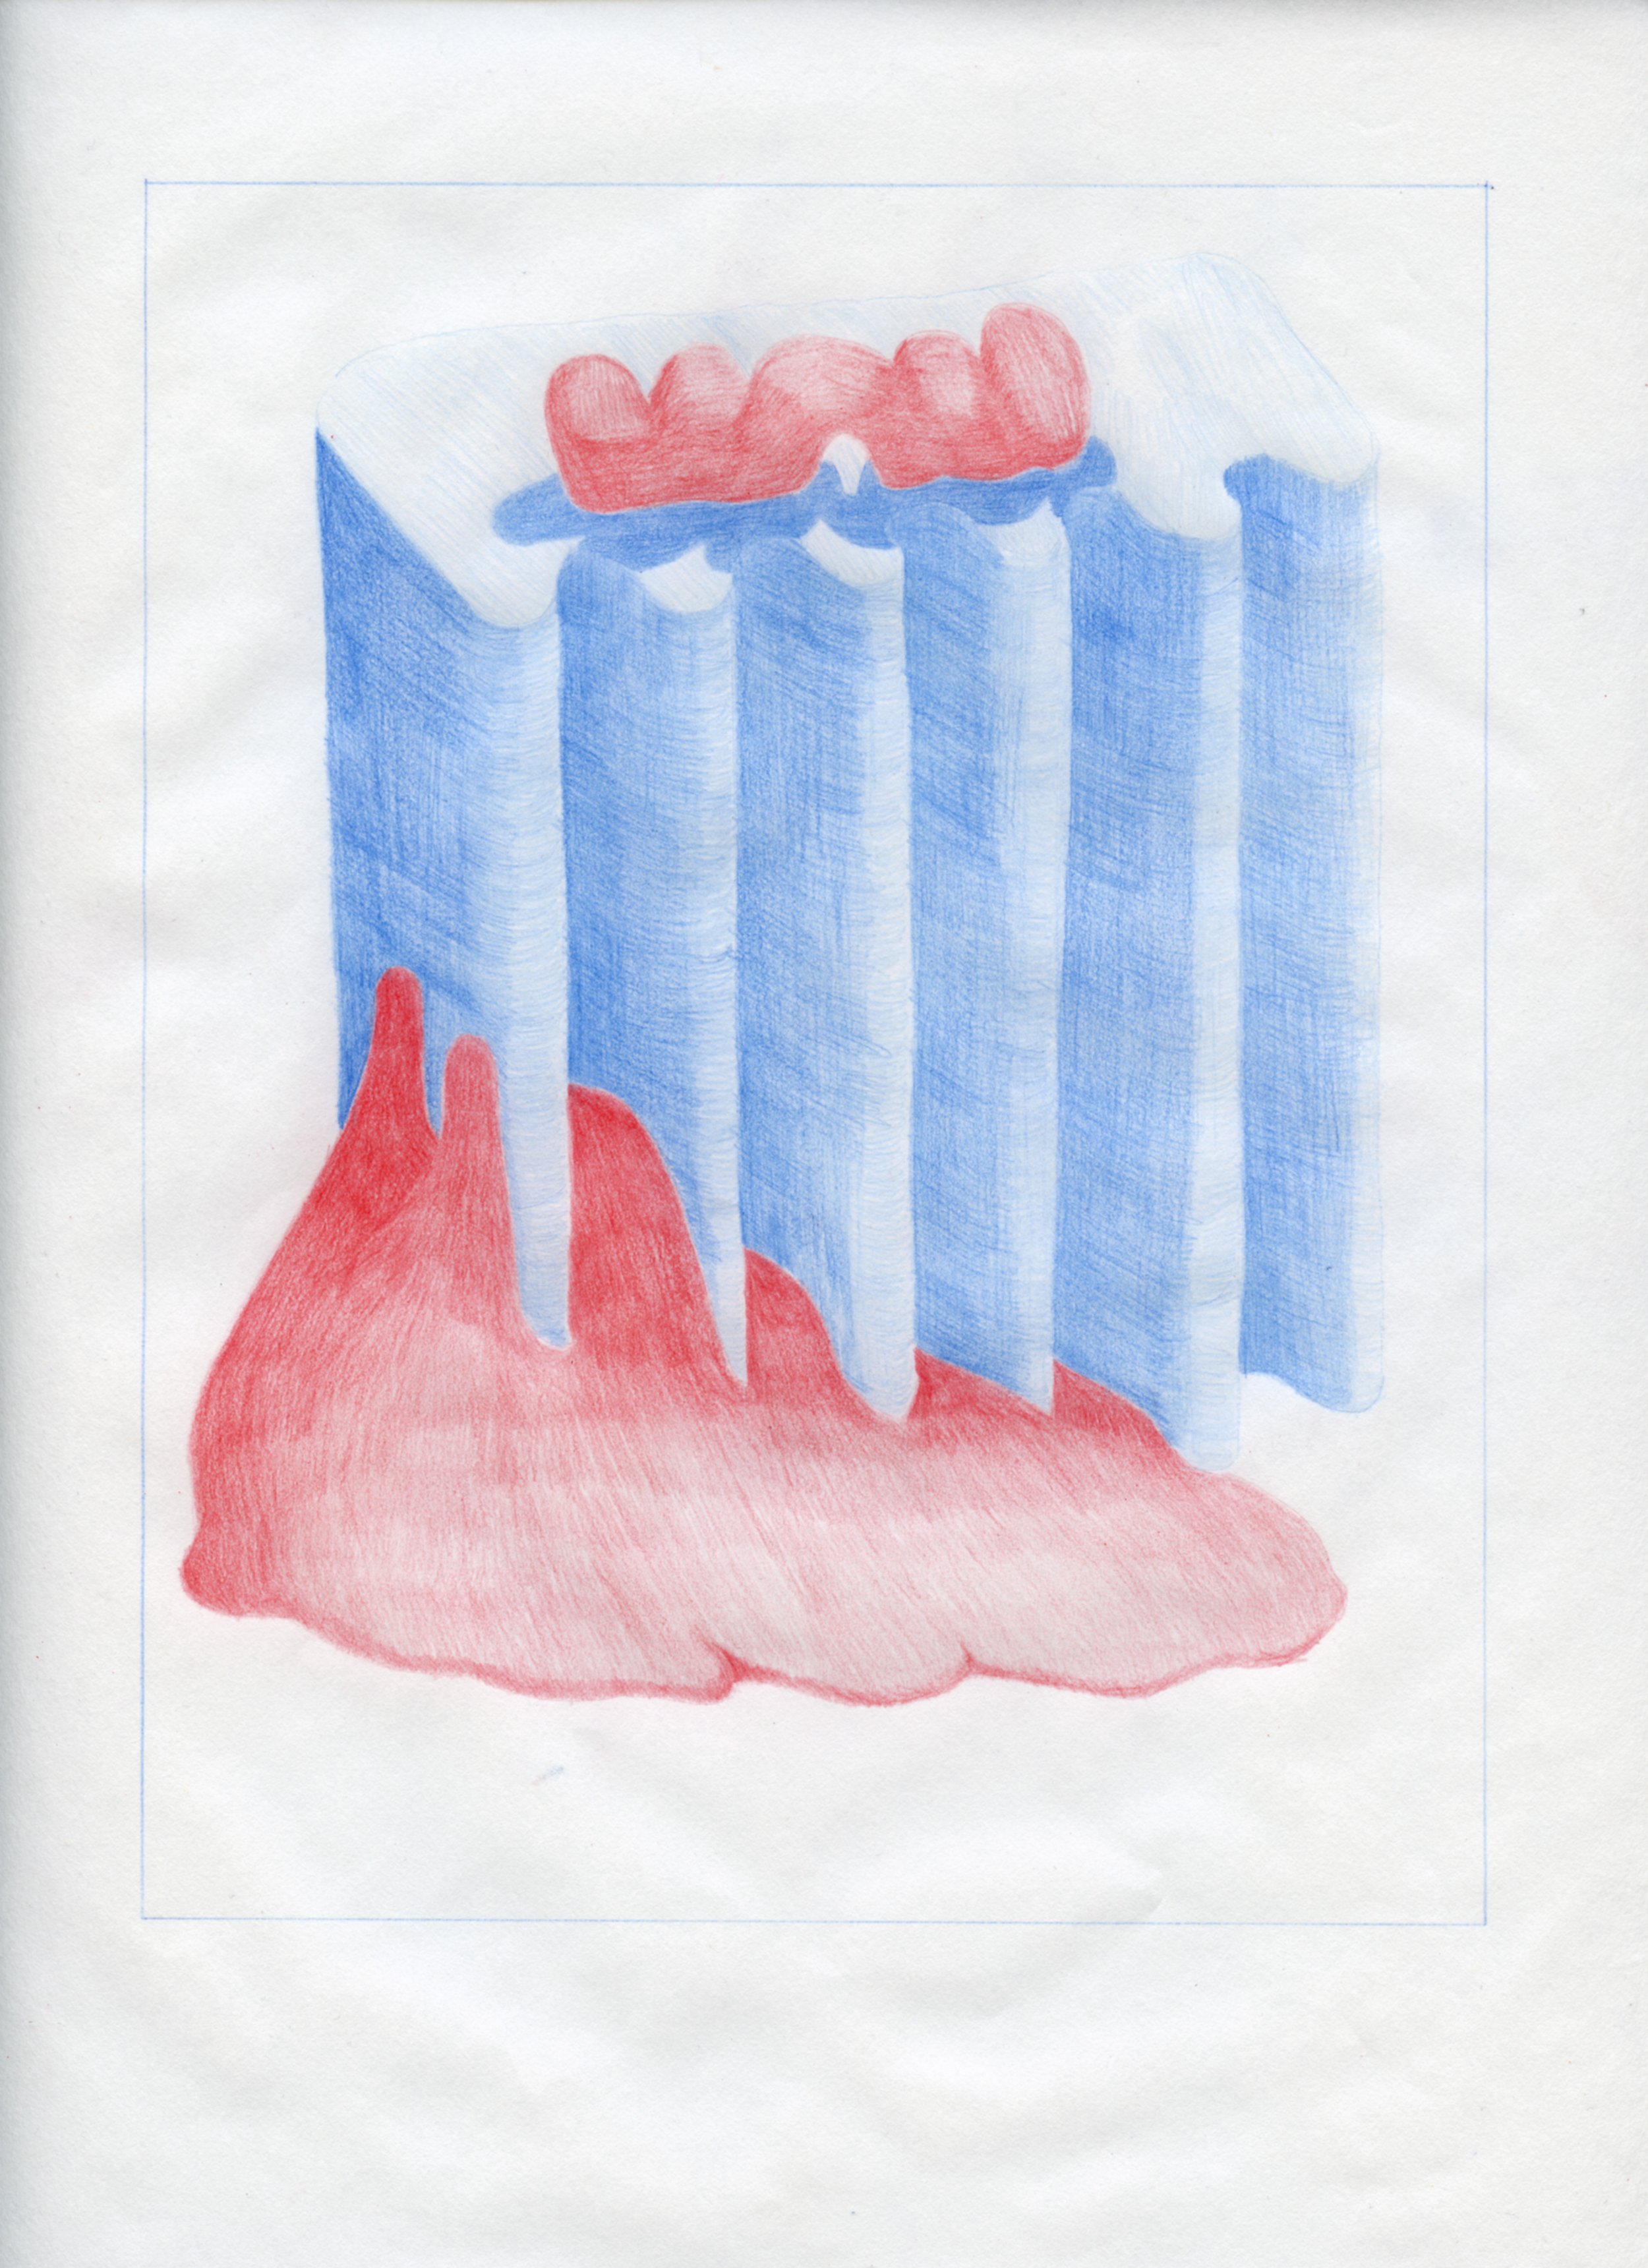  Workplace Drawing #37, 2021, Red and Blue Graphite on Bond Paper, 9”x 12”. 